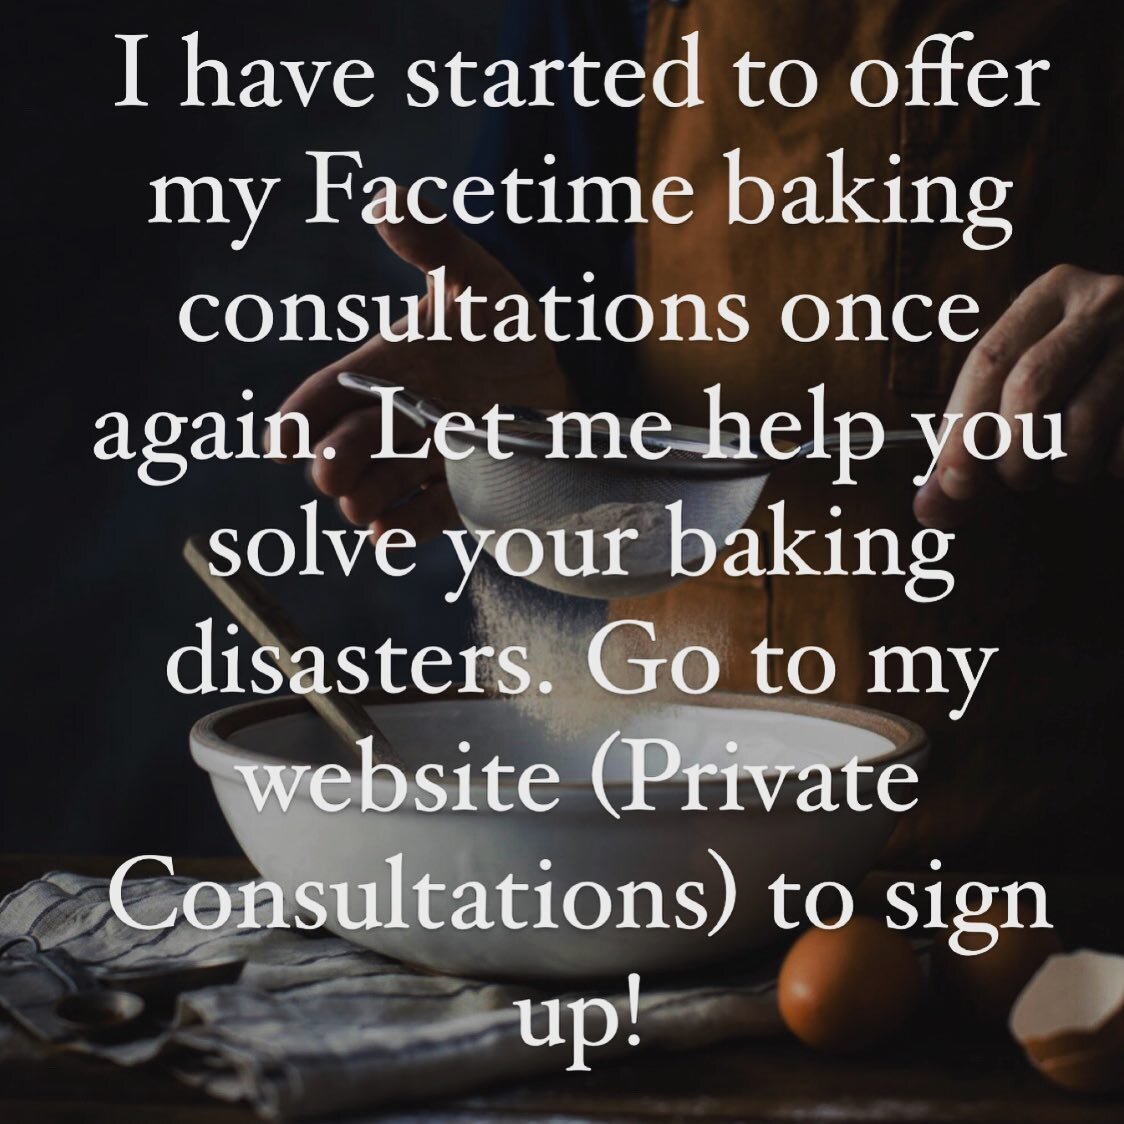 The holidays are coming up and for those of us with food allergies it is an anxious time of year. Sign up for a private consultation with me. I can go over your menu, solve your baking issues and even help you with kitchen/advance prep organization. 